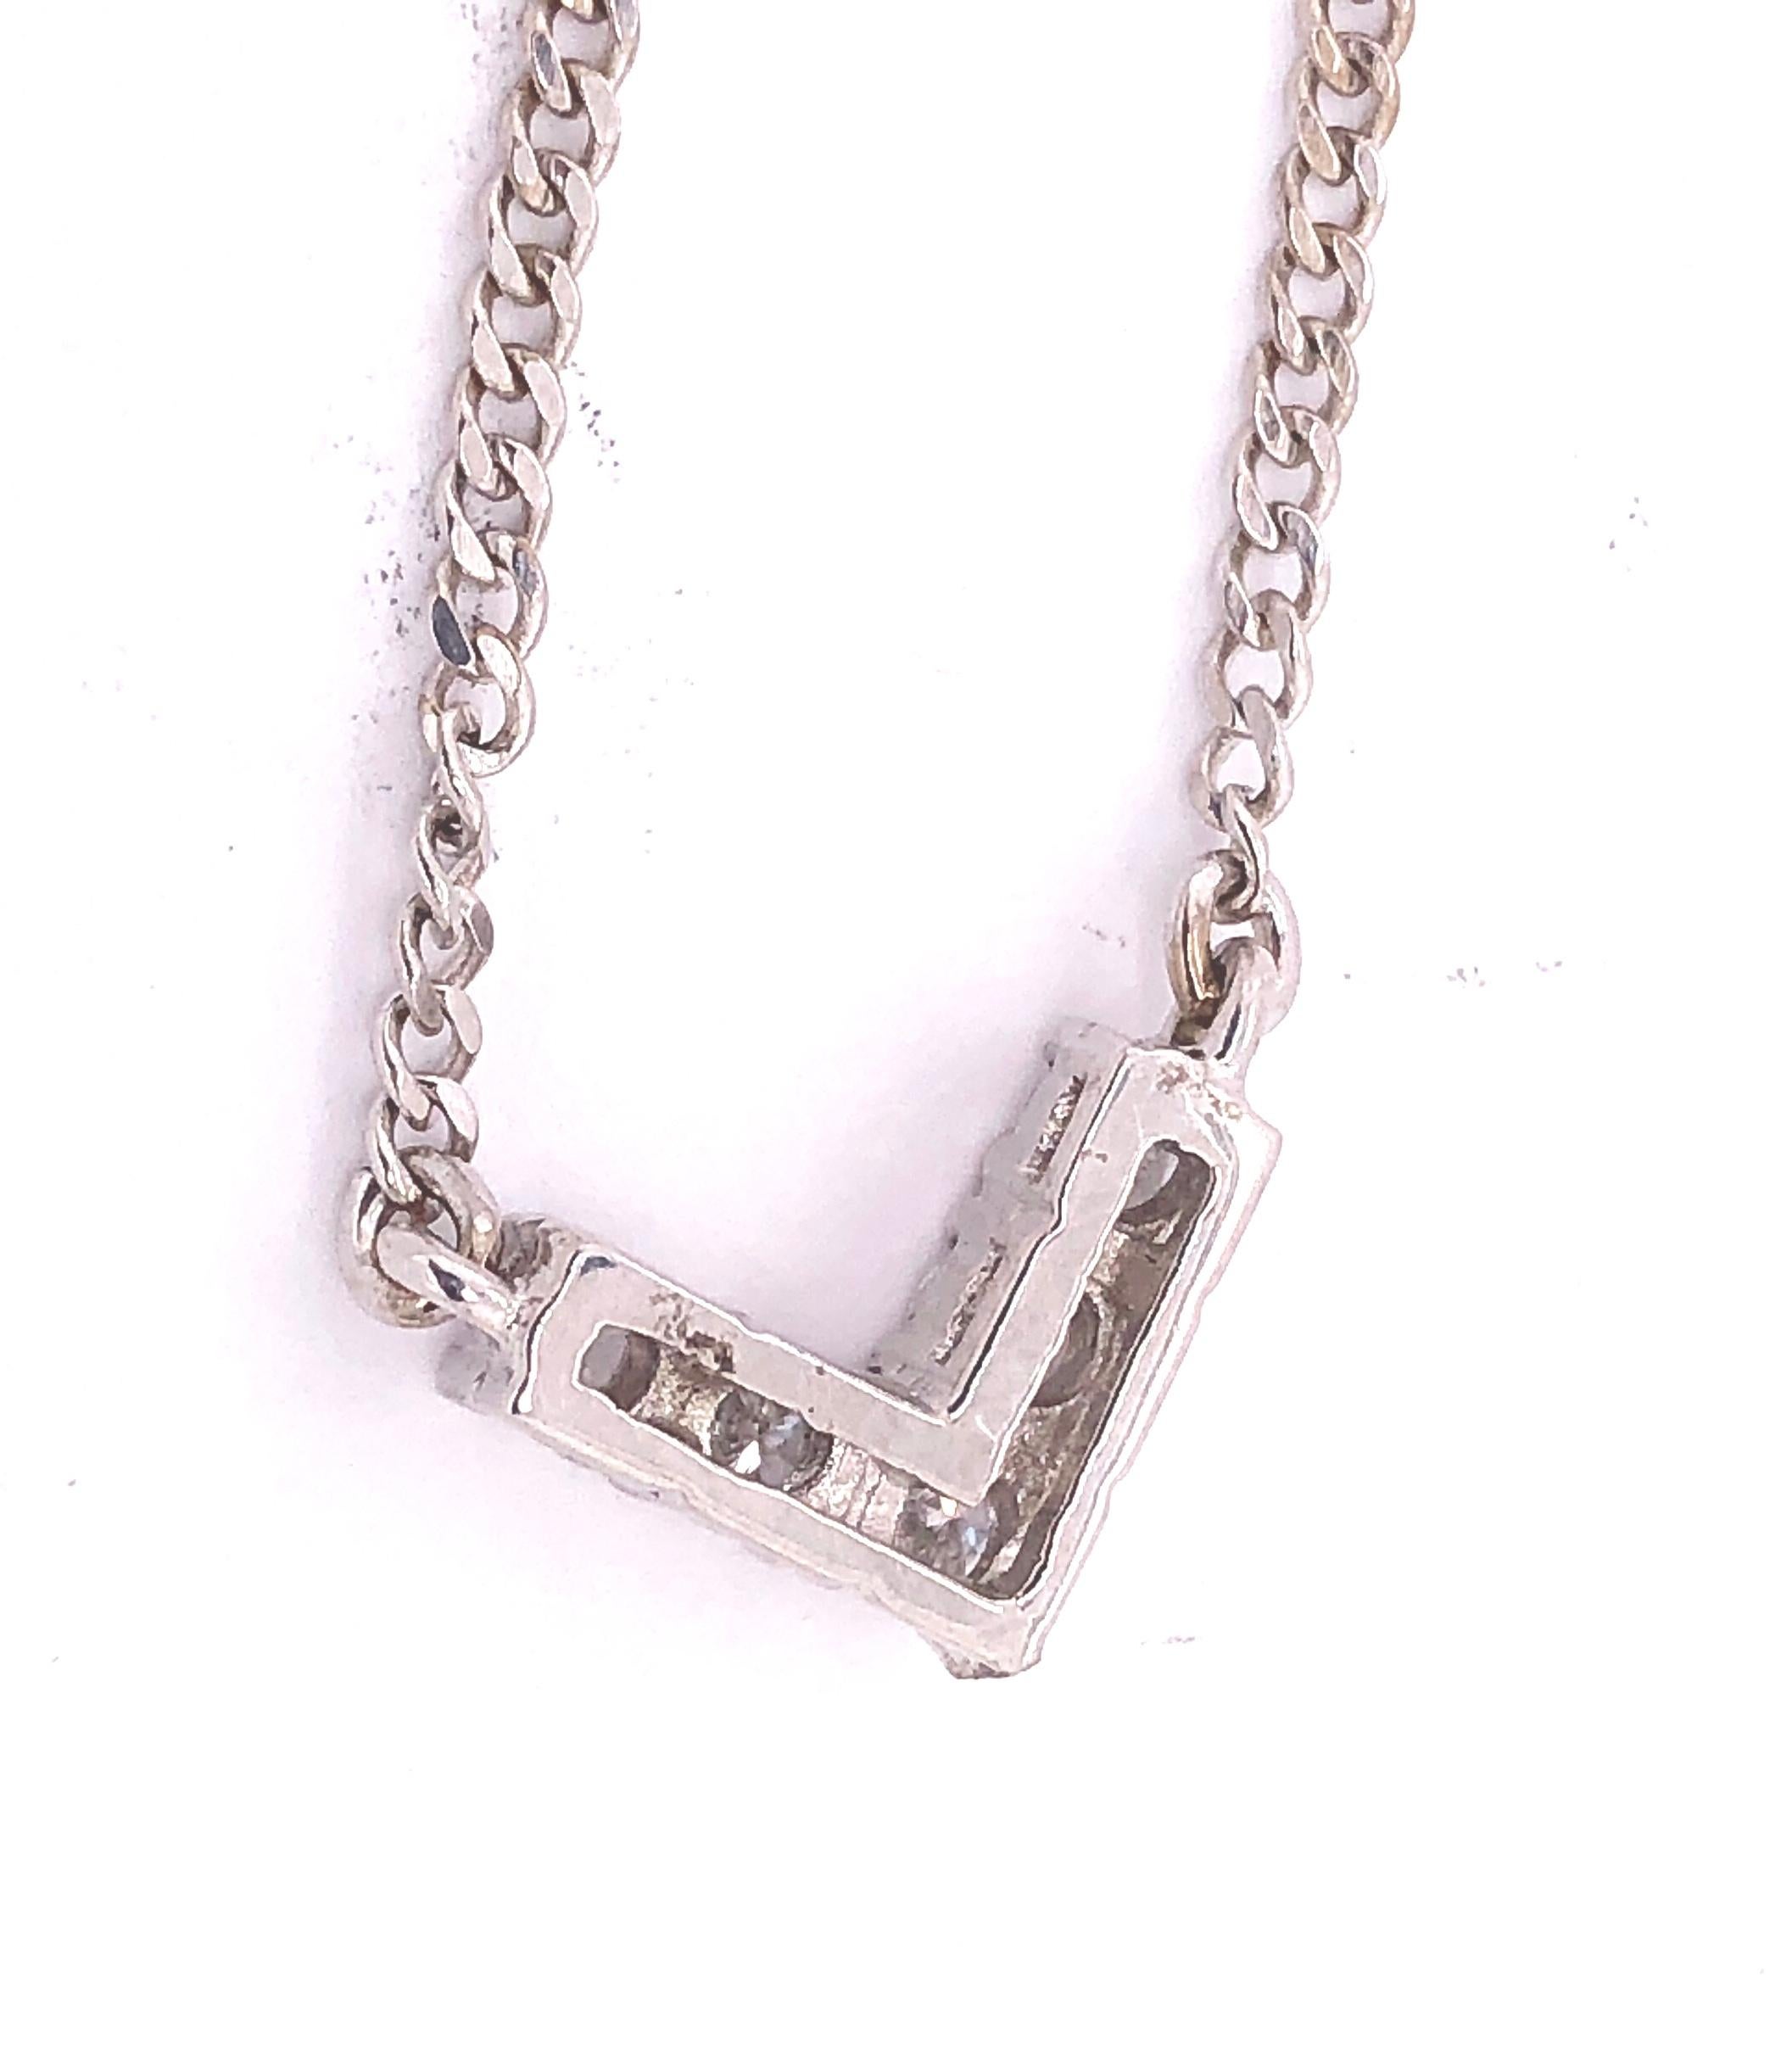 14 Karat White Gold Necklace with Diamond Pendant In Good Condition For Sale In Stamford, CT